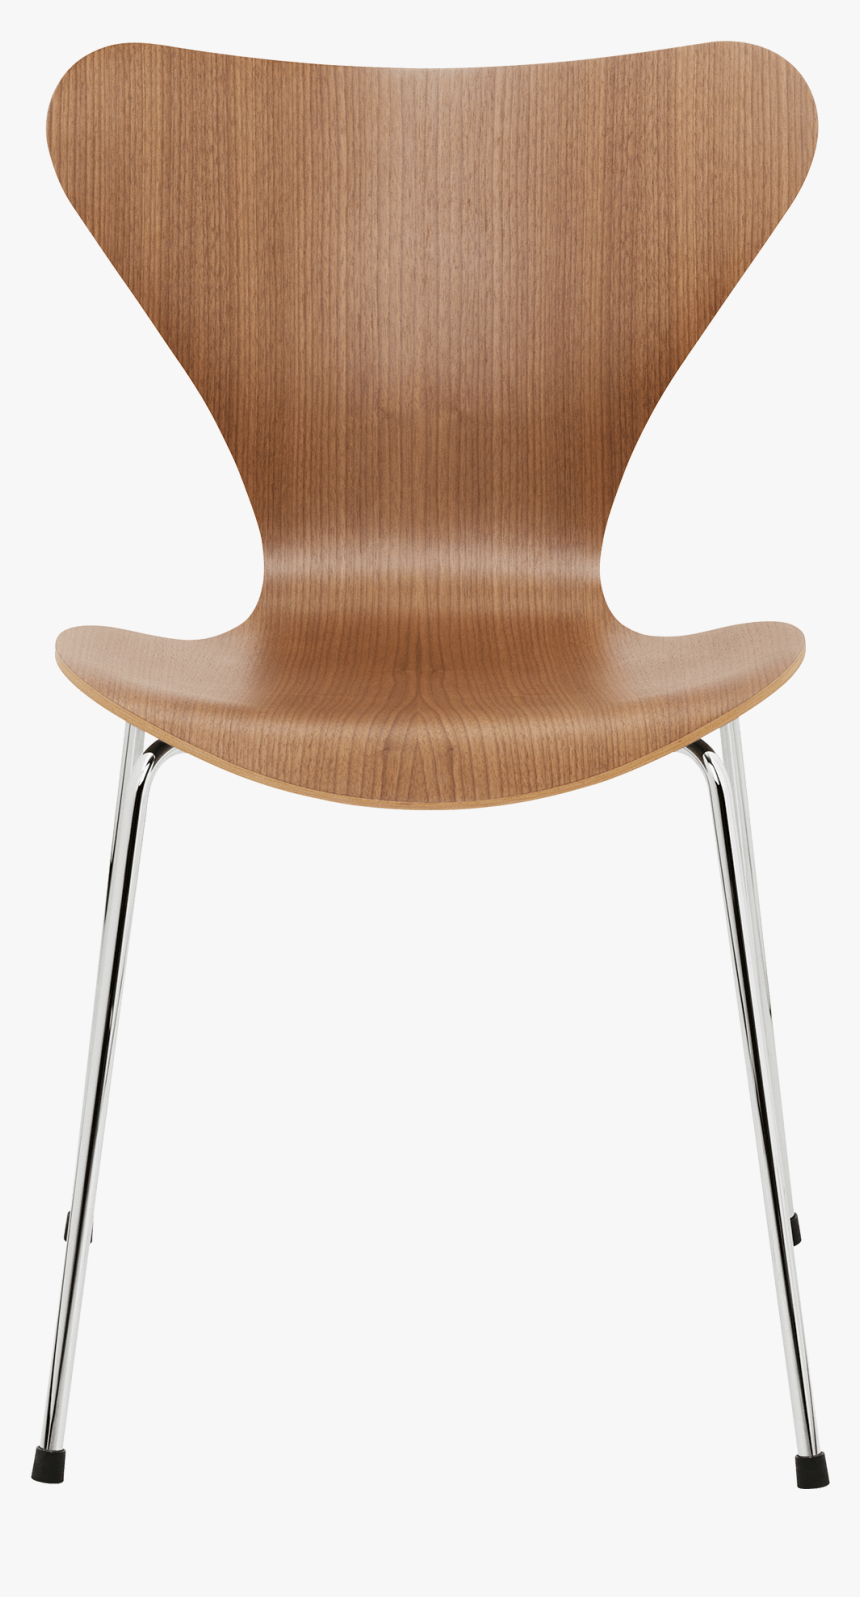 Most Iconic Chair Designer, HD Png Download, Free Download